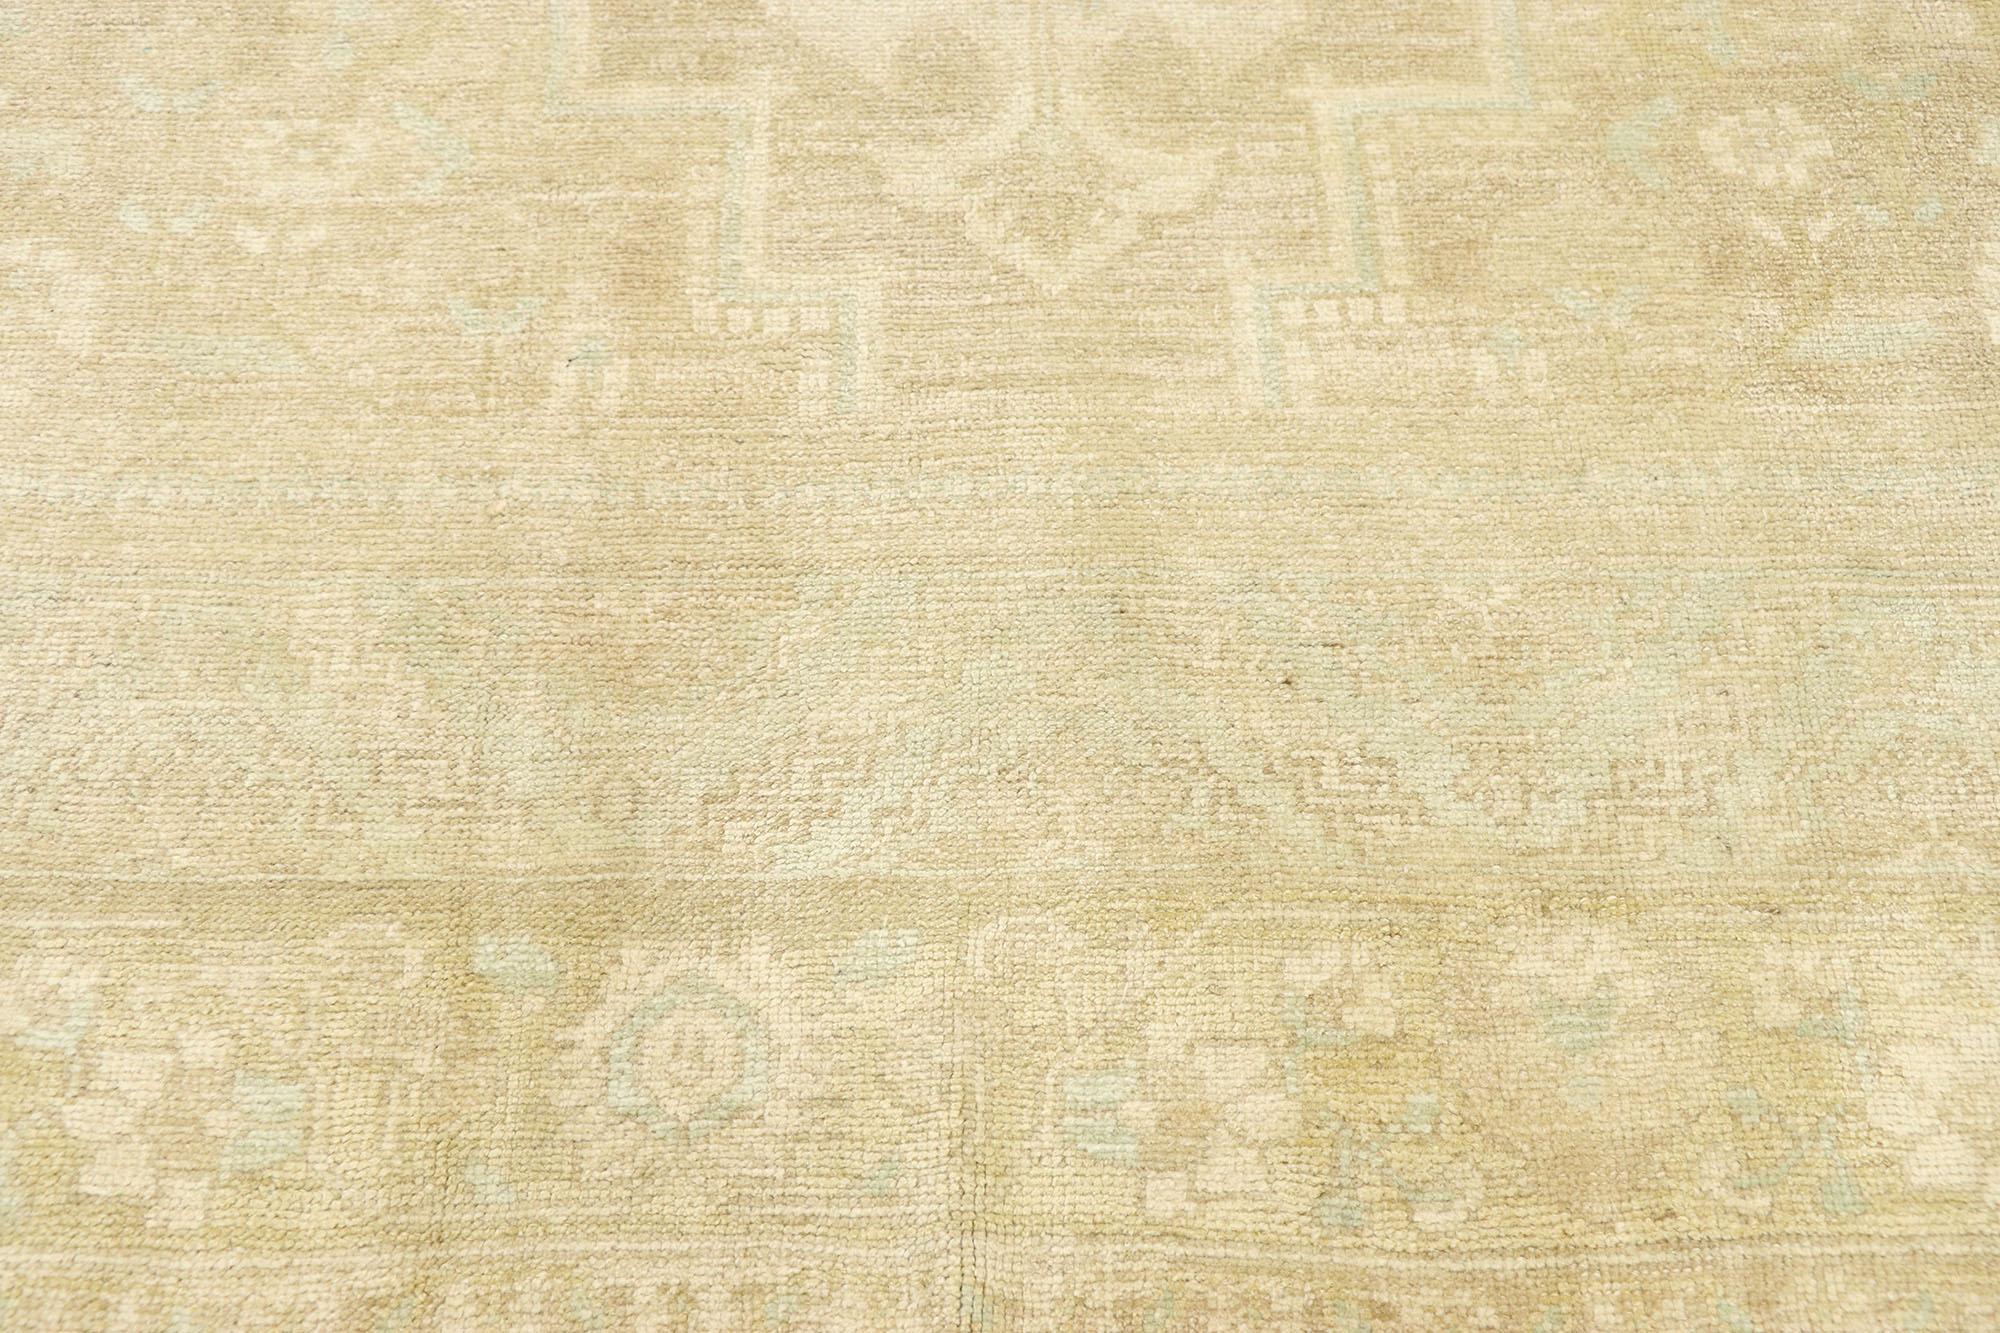 Hand-Knotted Vintage Turkish Oushak Rug with Muted Hues and Monochromatic Mission Style